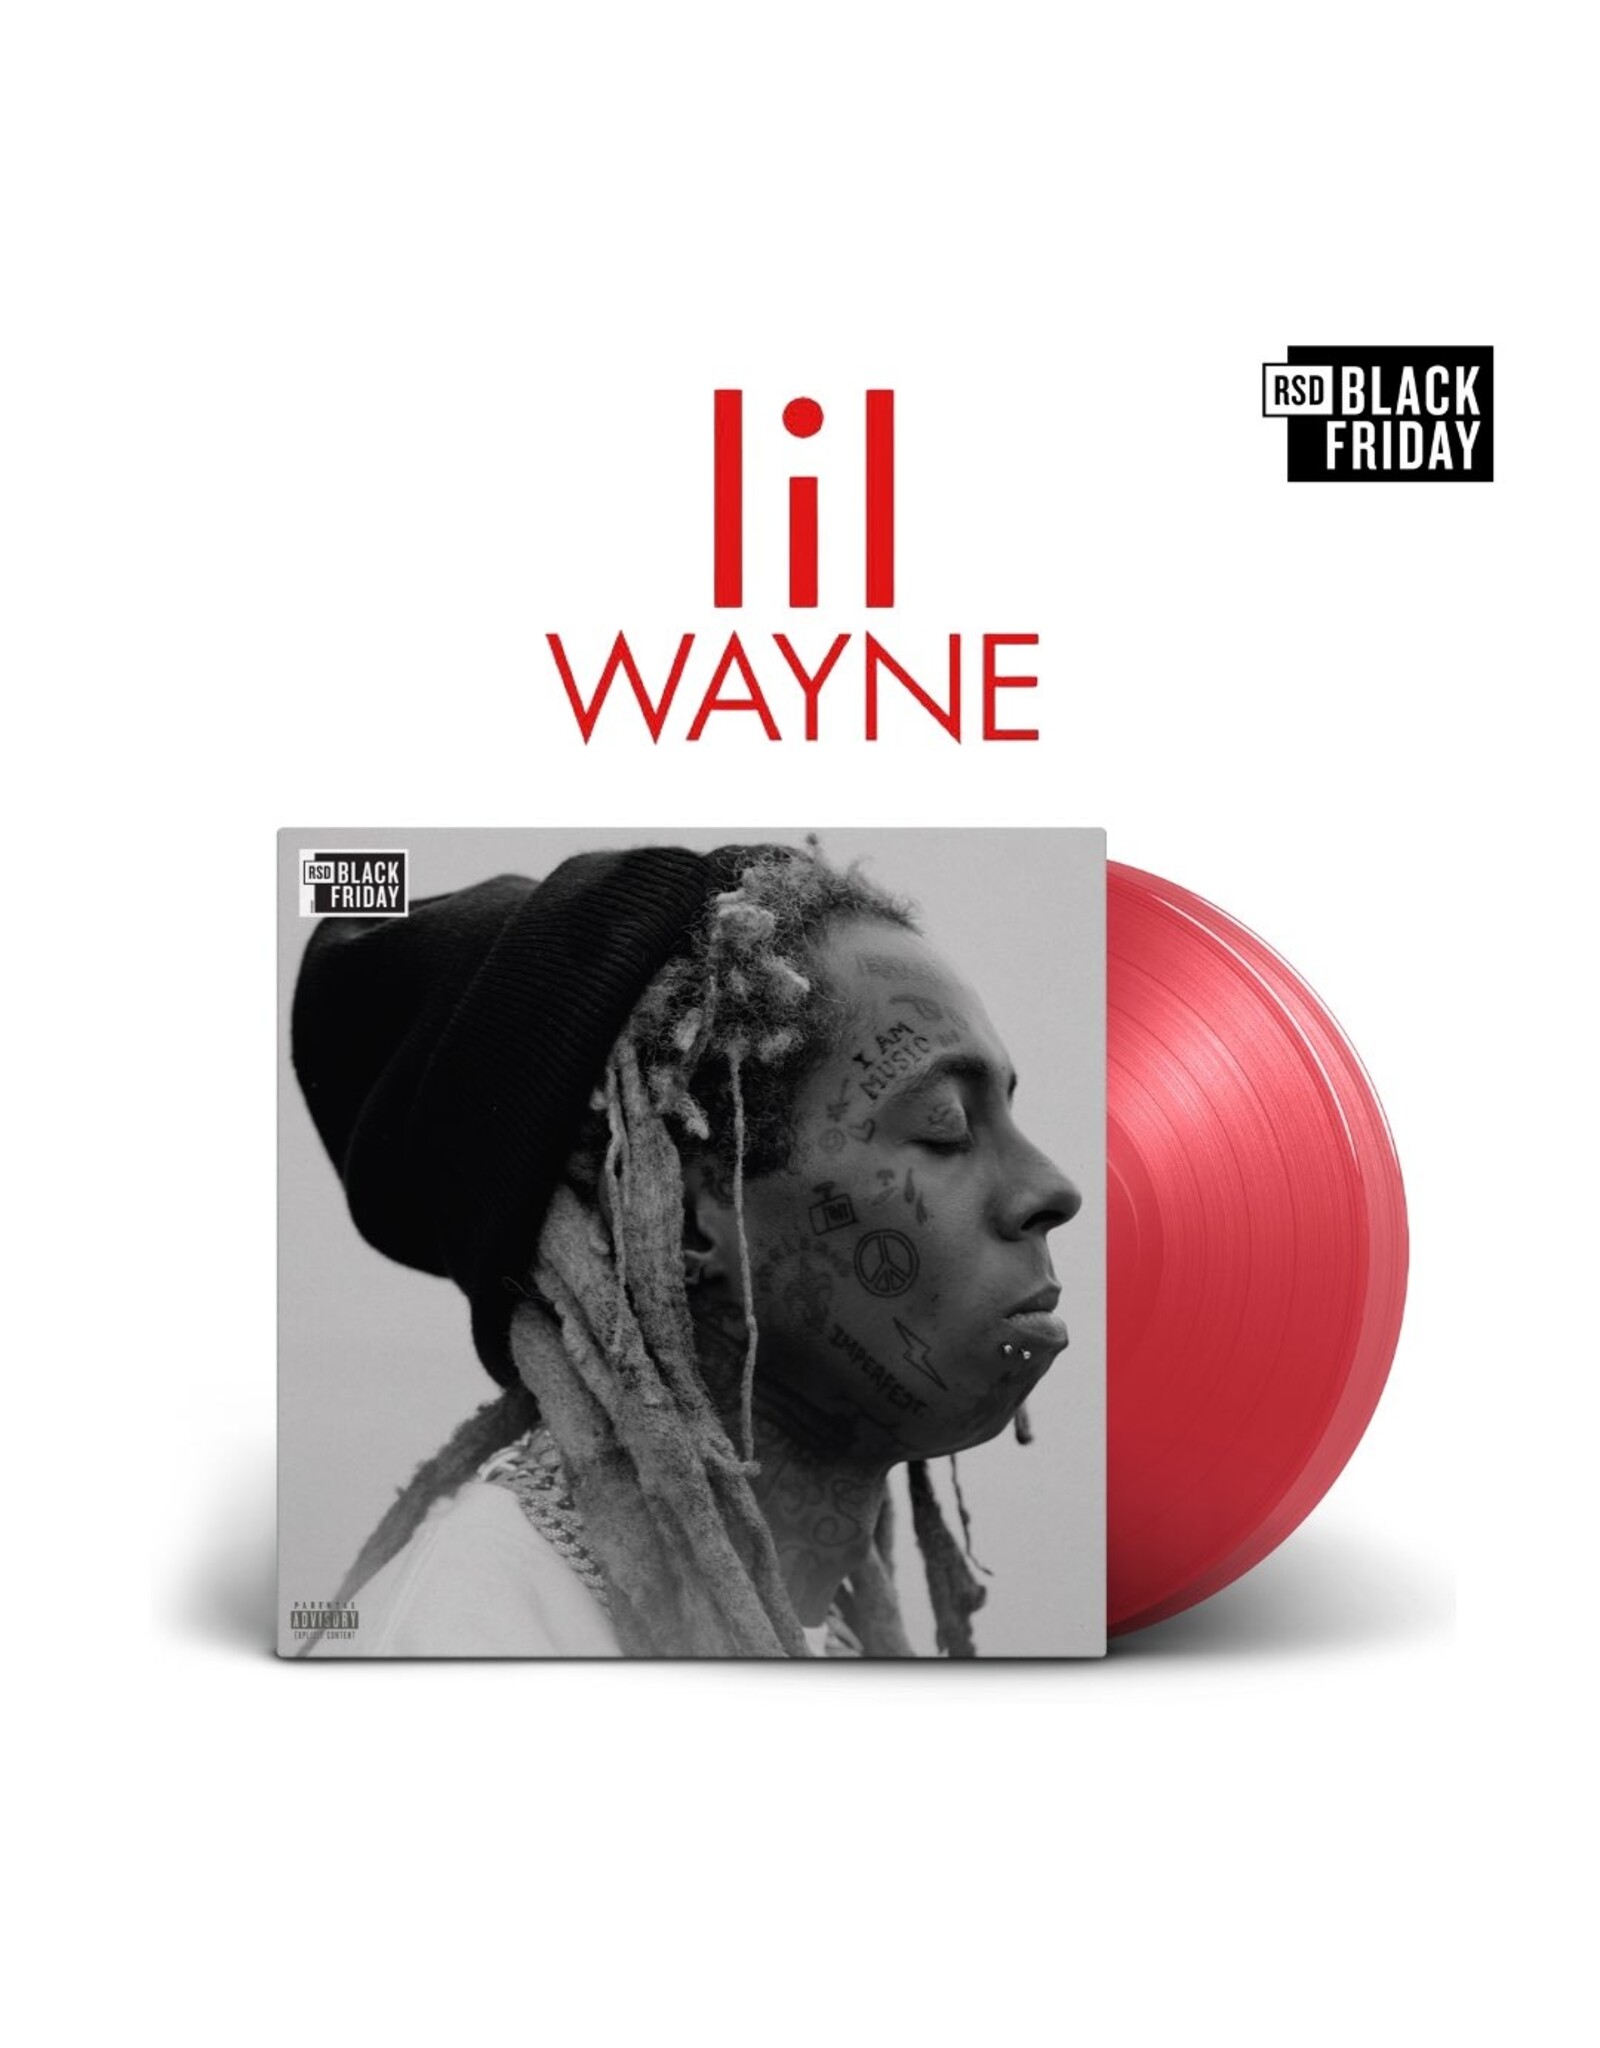 Lil Wayne - I Am Music (Greatest Hits) [Exclusive Ruby Vinyl]